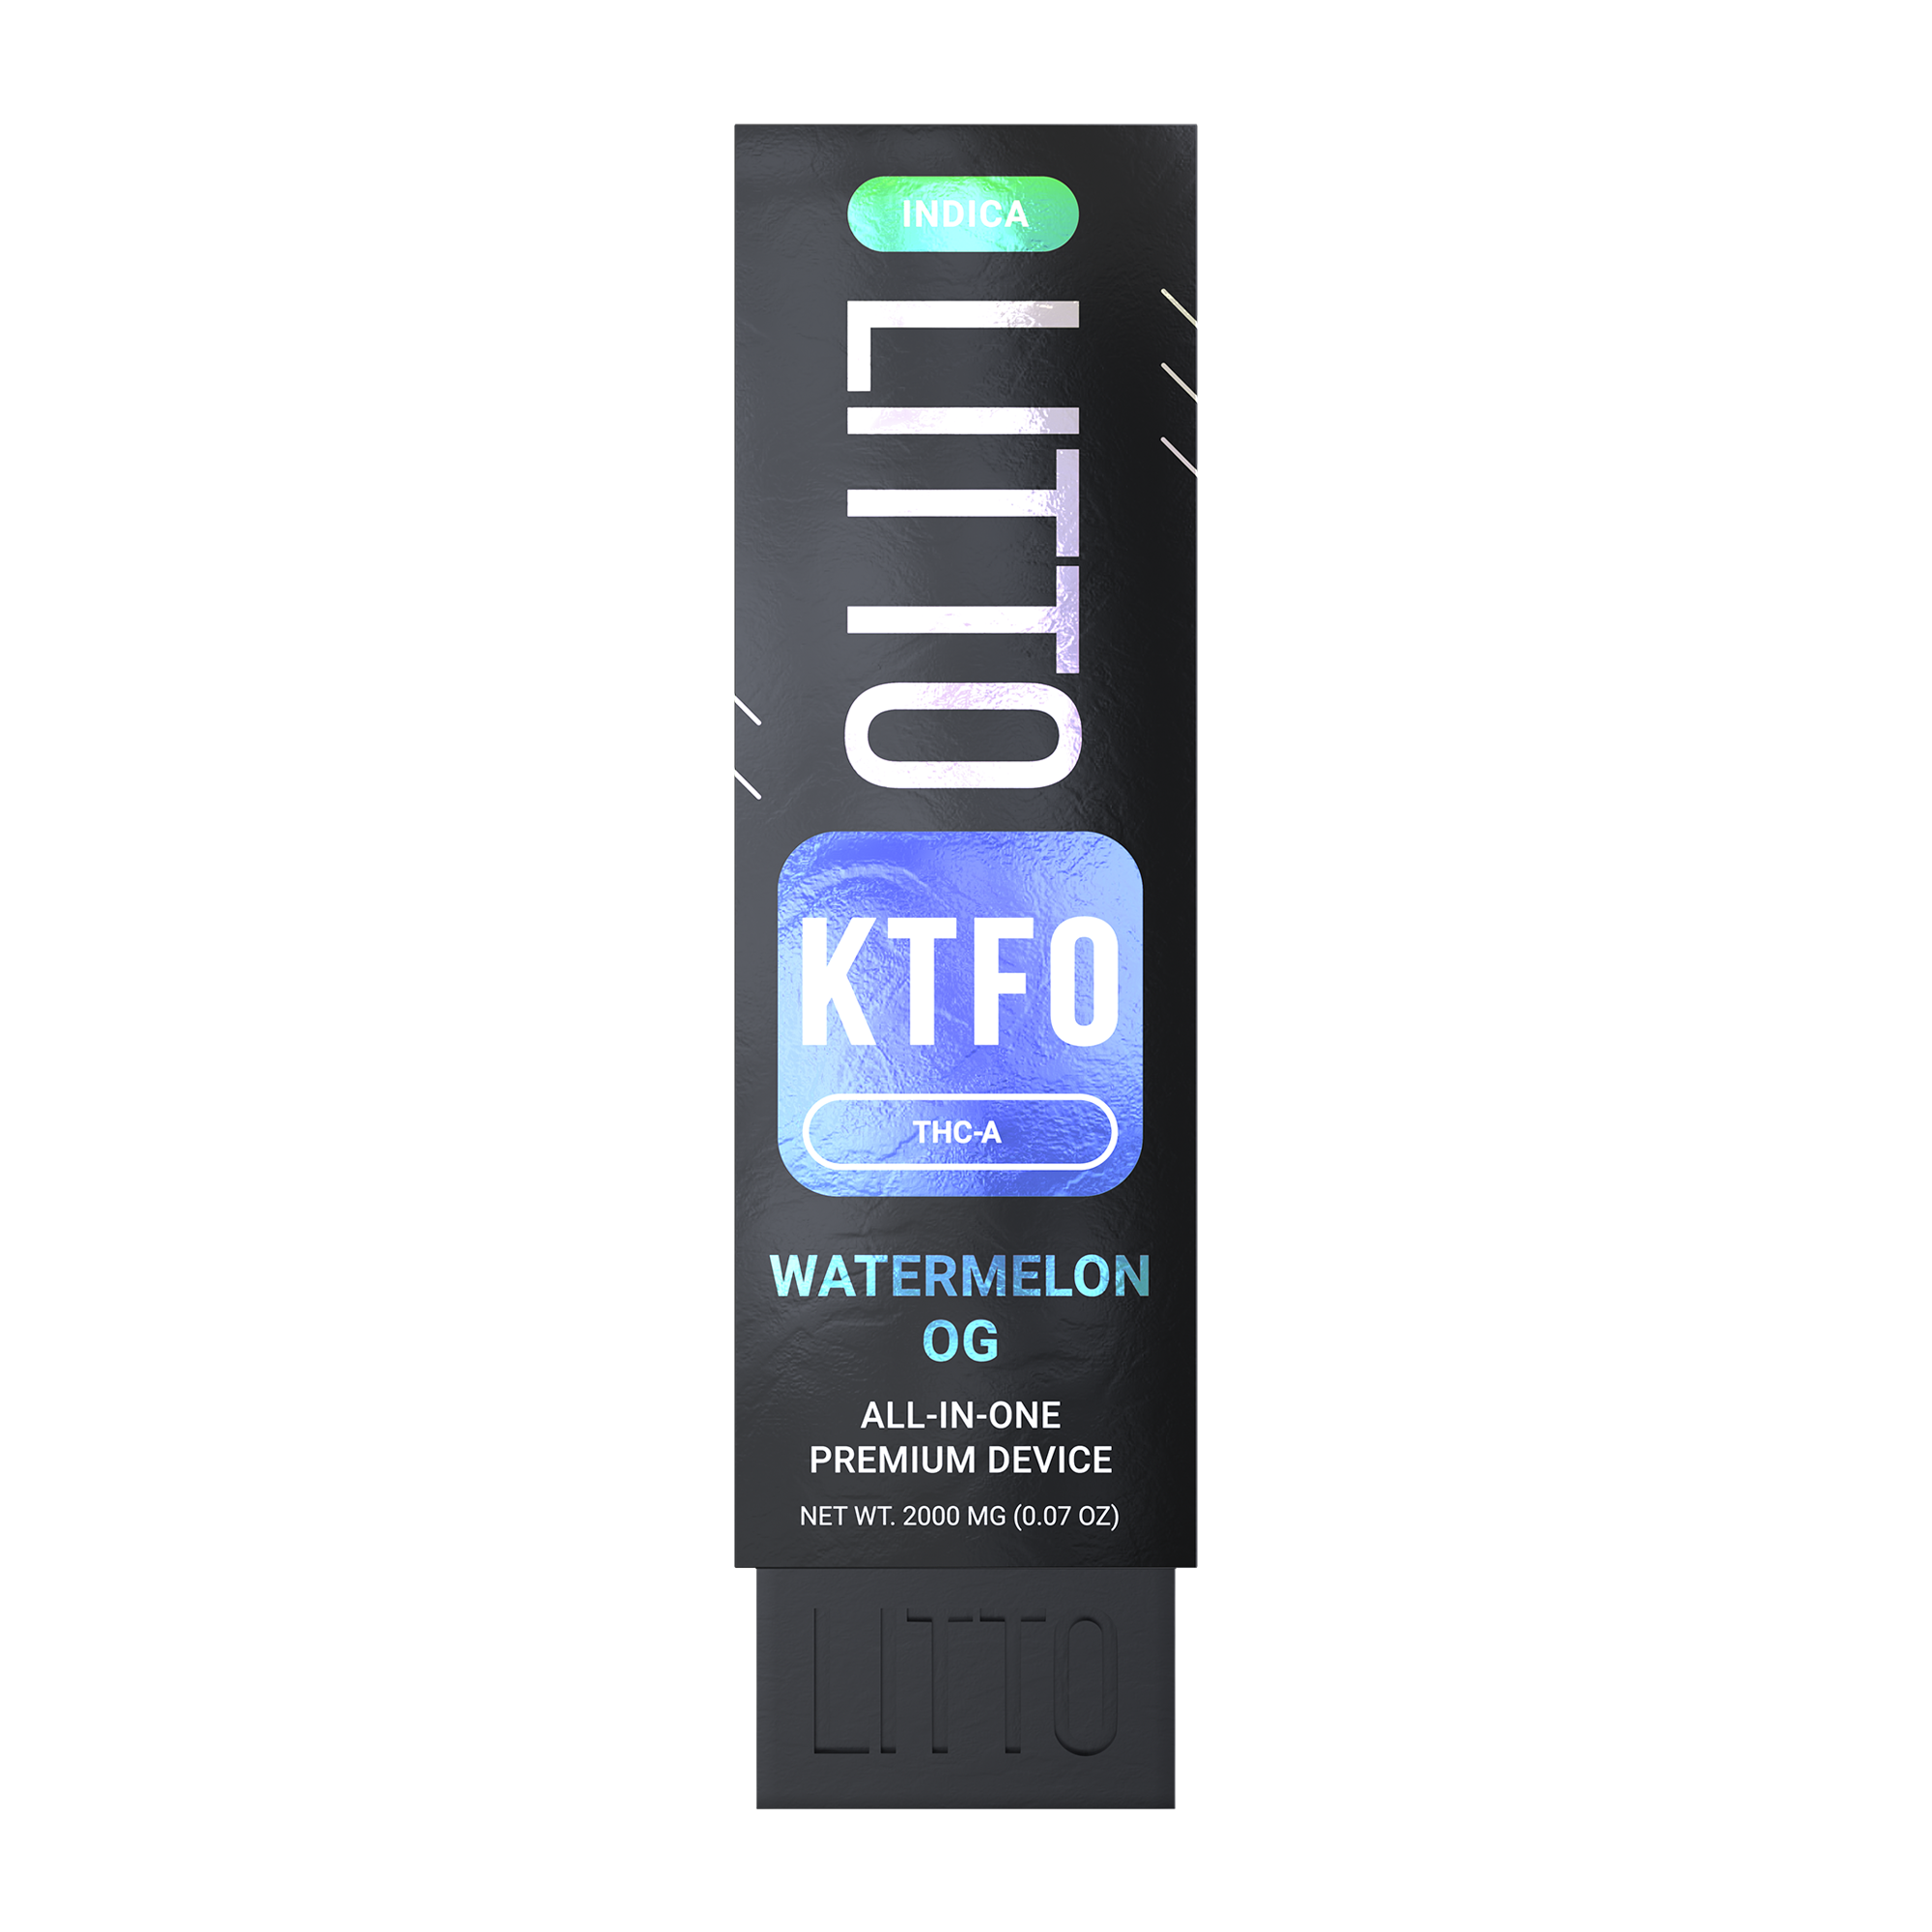 All-in-One Device - KTFO - Indica - THCA - Watermelon OG - 2G